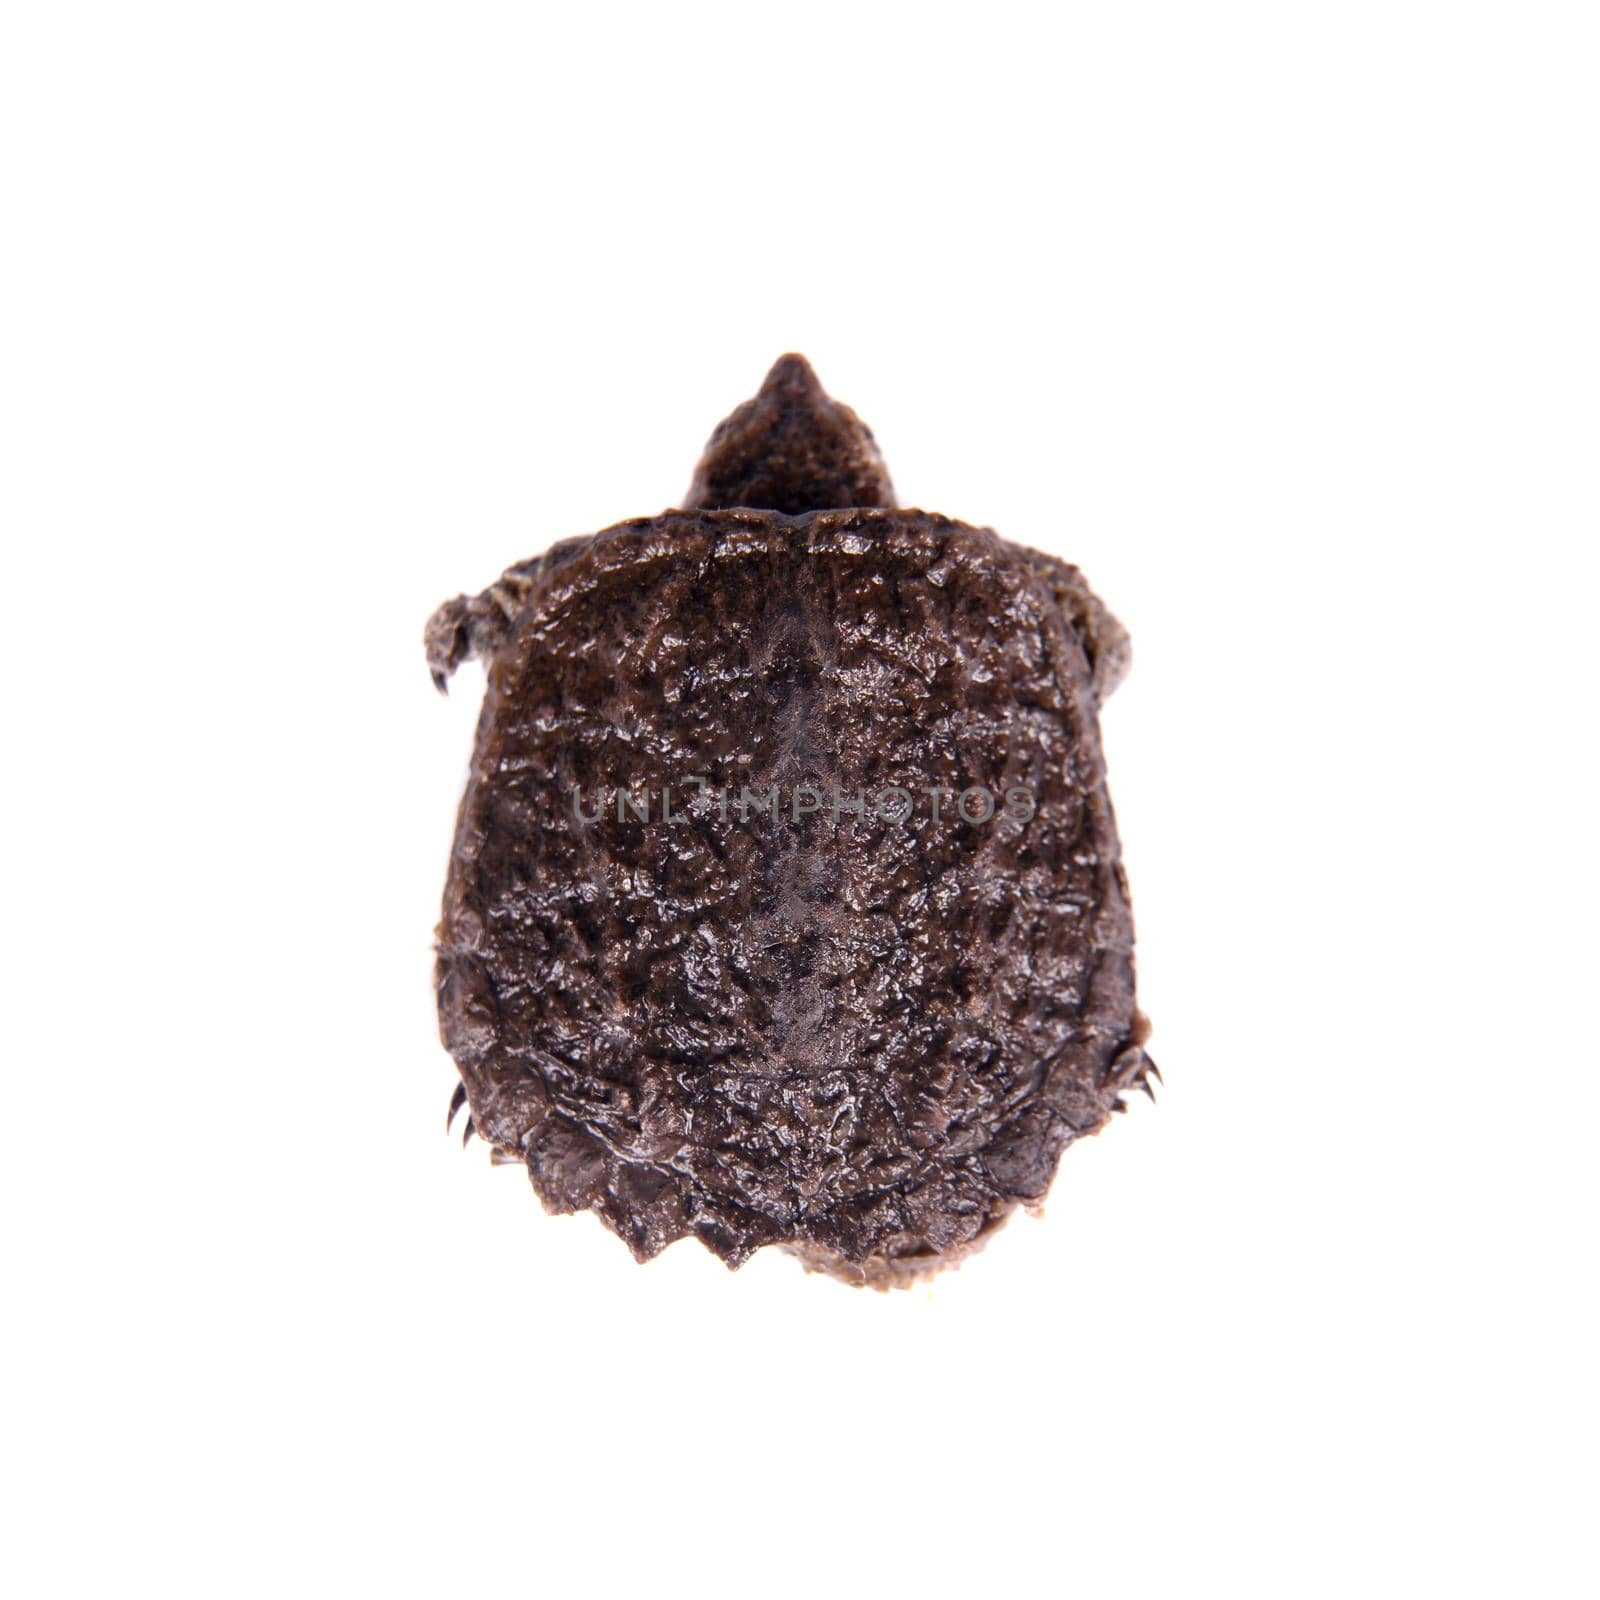 Common Snapping Turtle hatchling, Chelydra serpentina, on white background